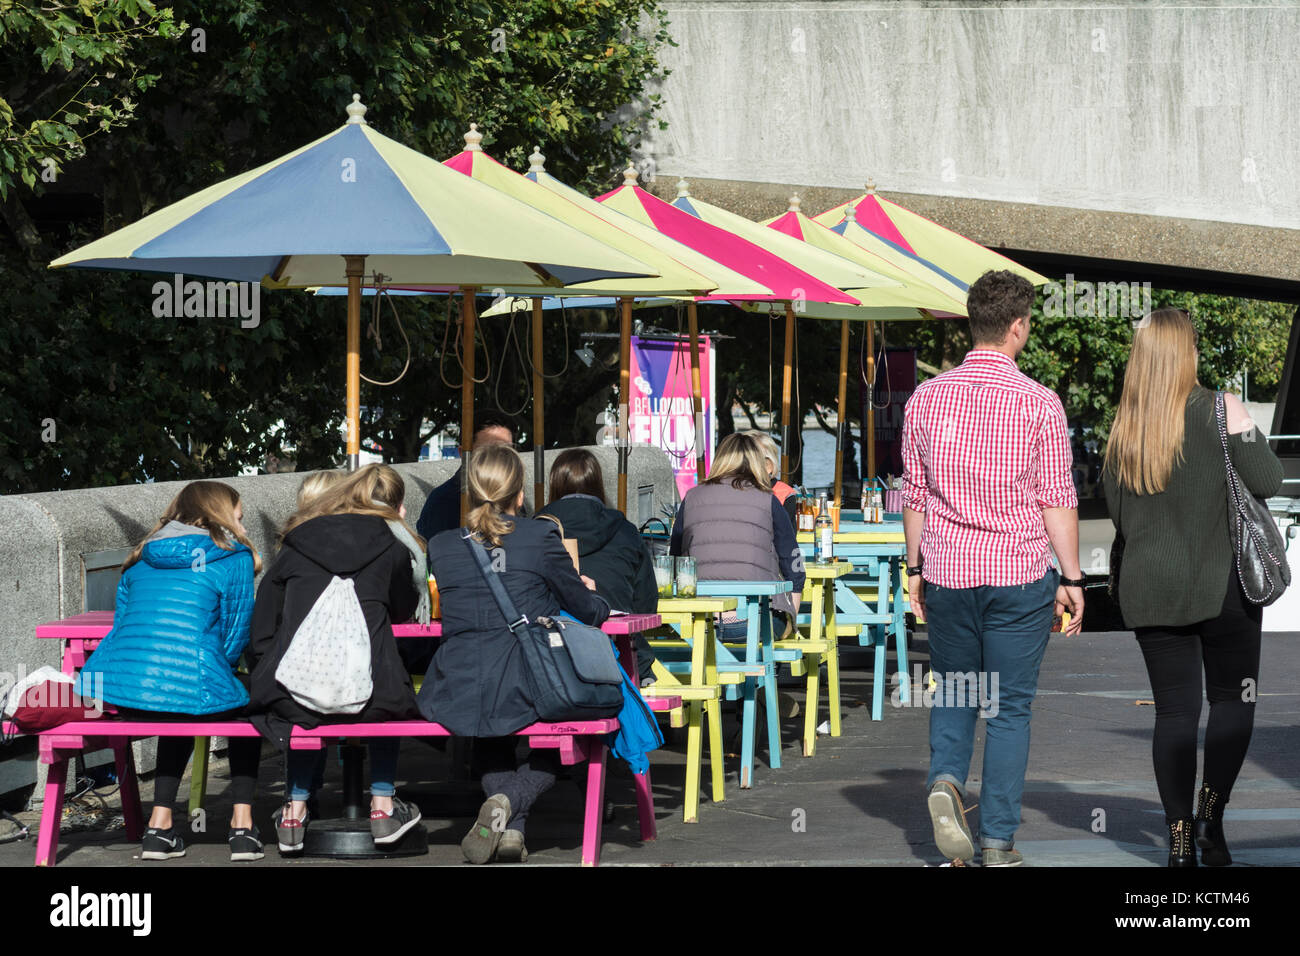 Garden umbrellas and tables outside the Wahaca restaurant and cafe at the South Bank Centre, London, UK Stock Photo